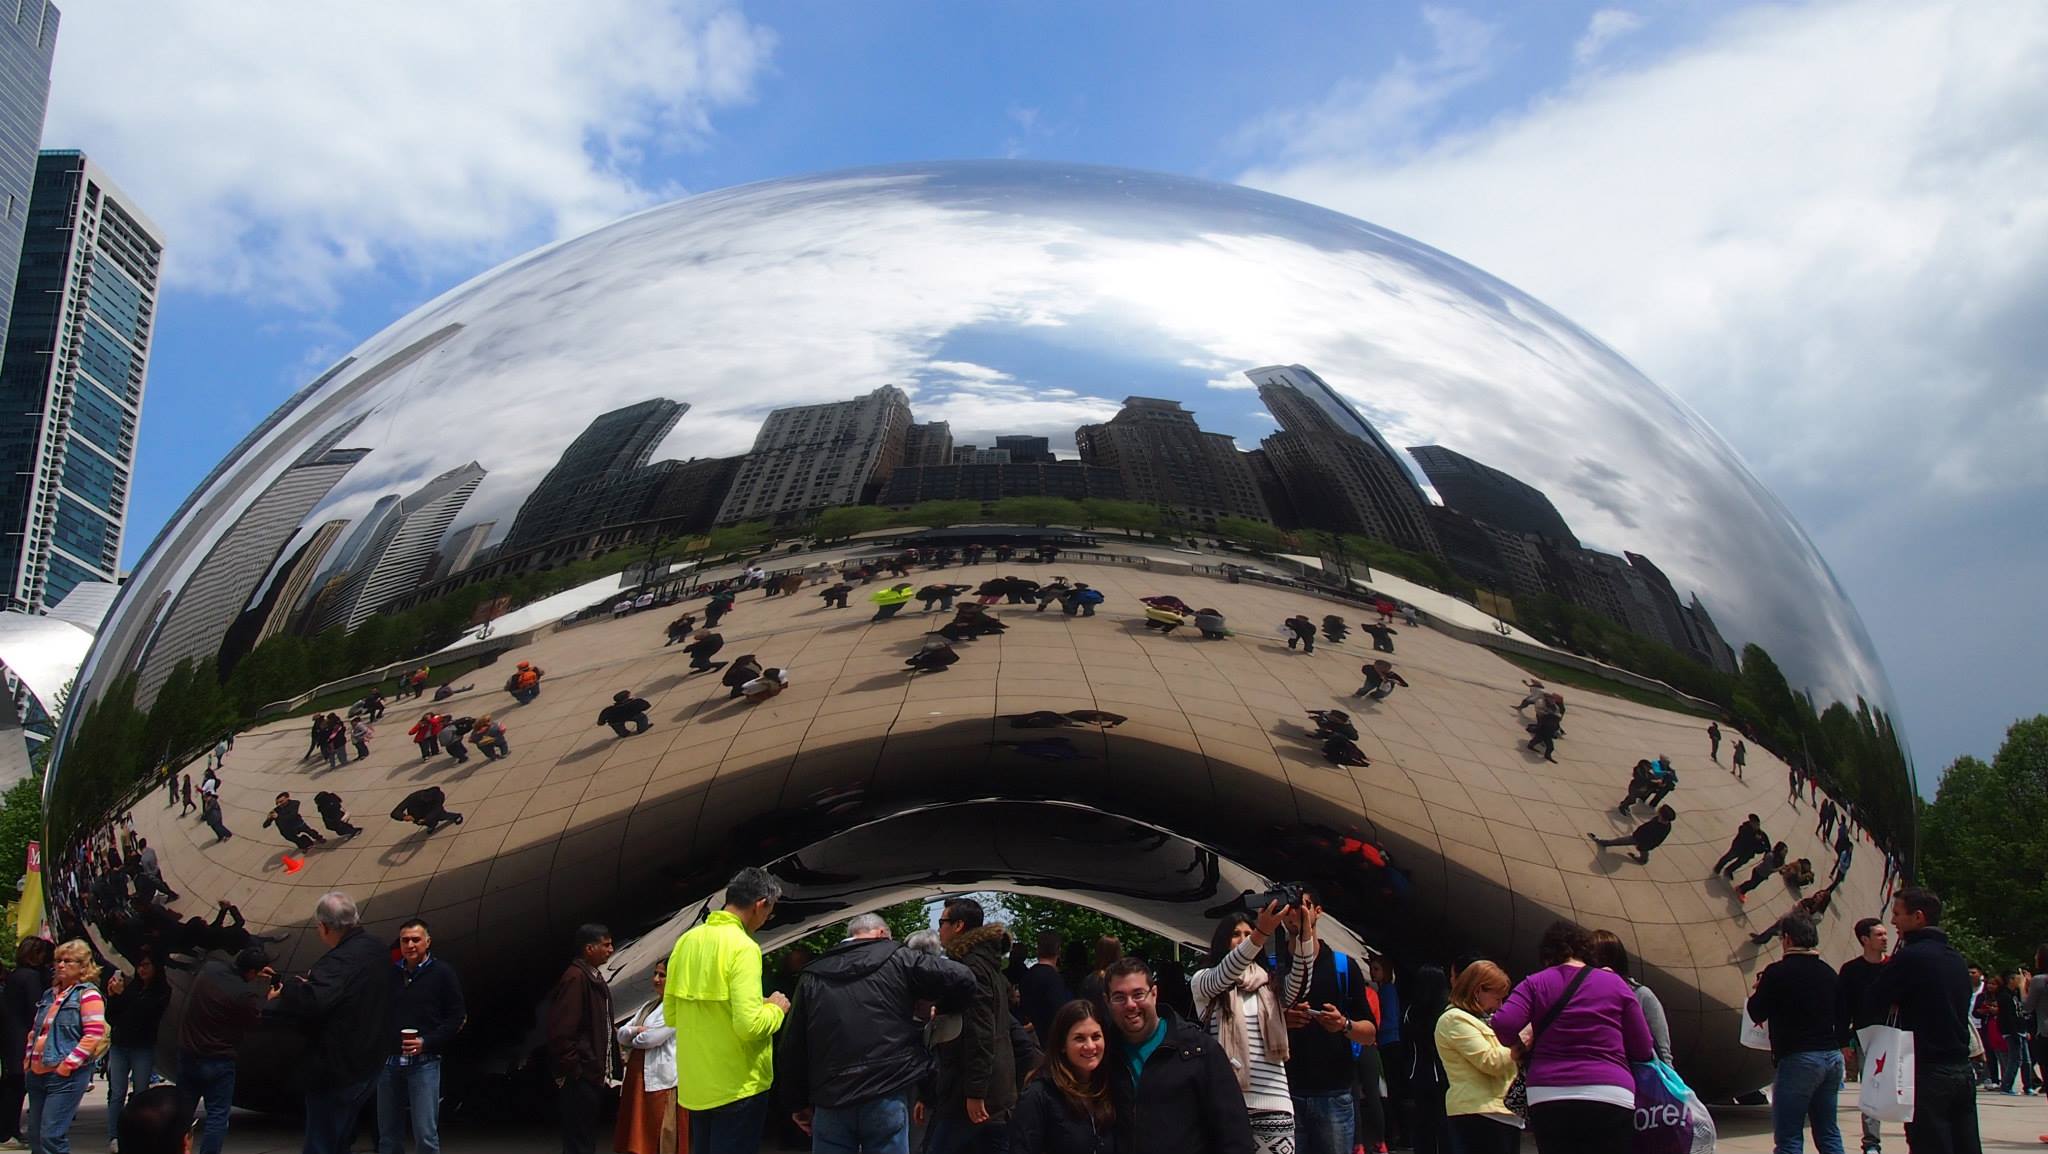 Photo of Cloud Gate 'The Bean' in Chicago by Chris Socha